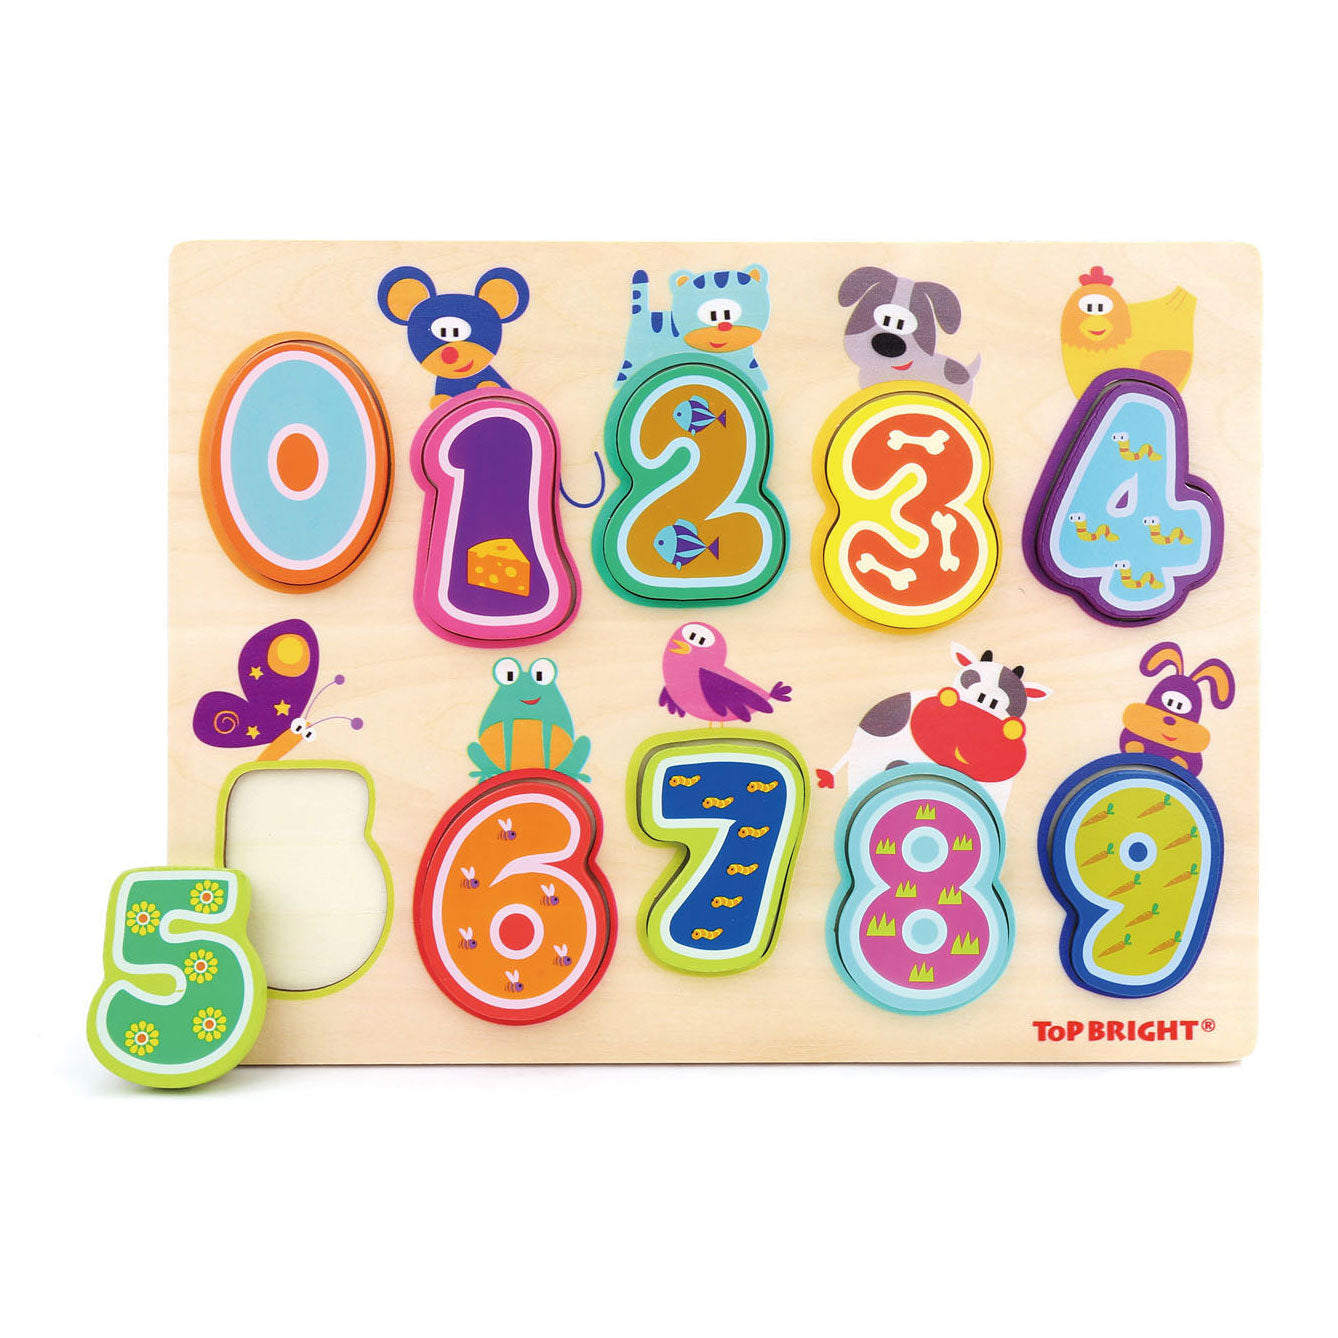 TOPBRIGHT Wooden Puzzle Animals and Numbers 10pcs. Holz